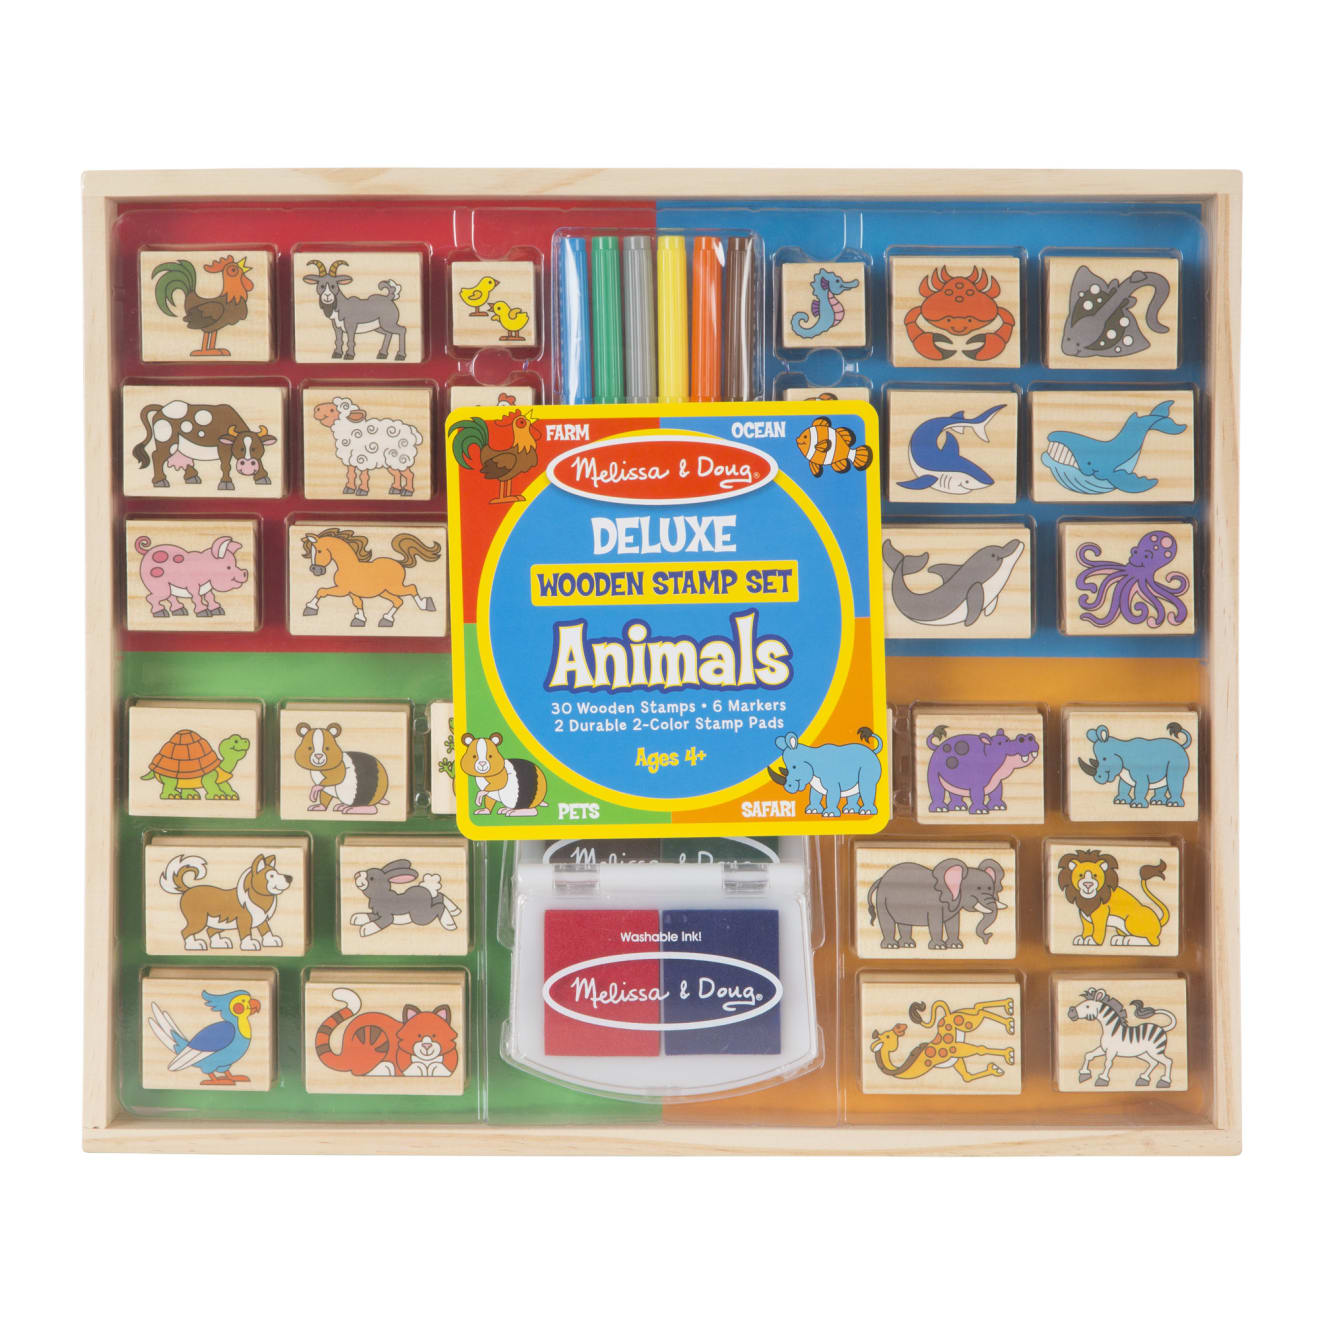 https://cdn.shopify.com/s/files/1/0550/8487/5830/products/Deluxe-Wooden-Stamp-Set-Animals-002394-1-Packaging-Photo.jpg?v=1664894711